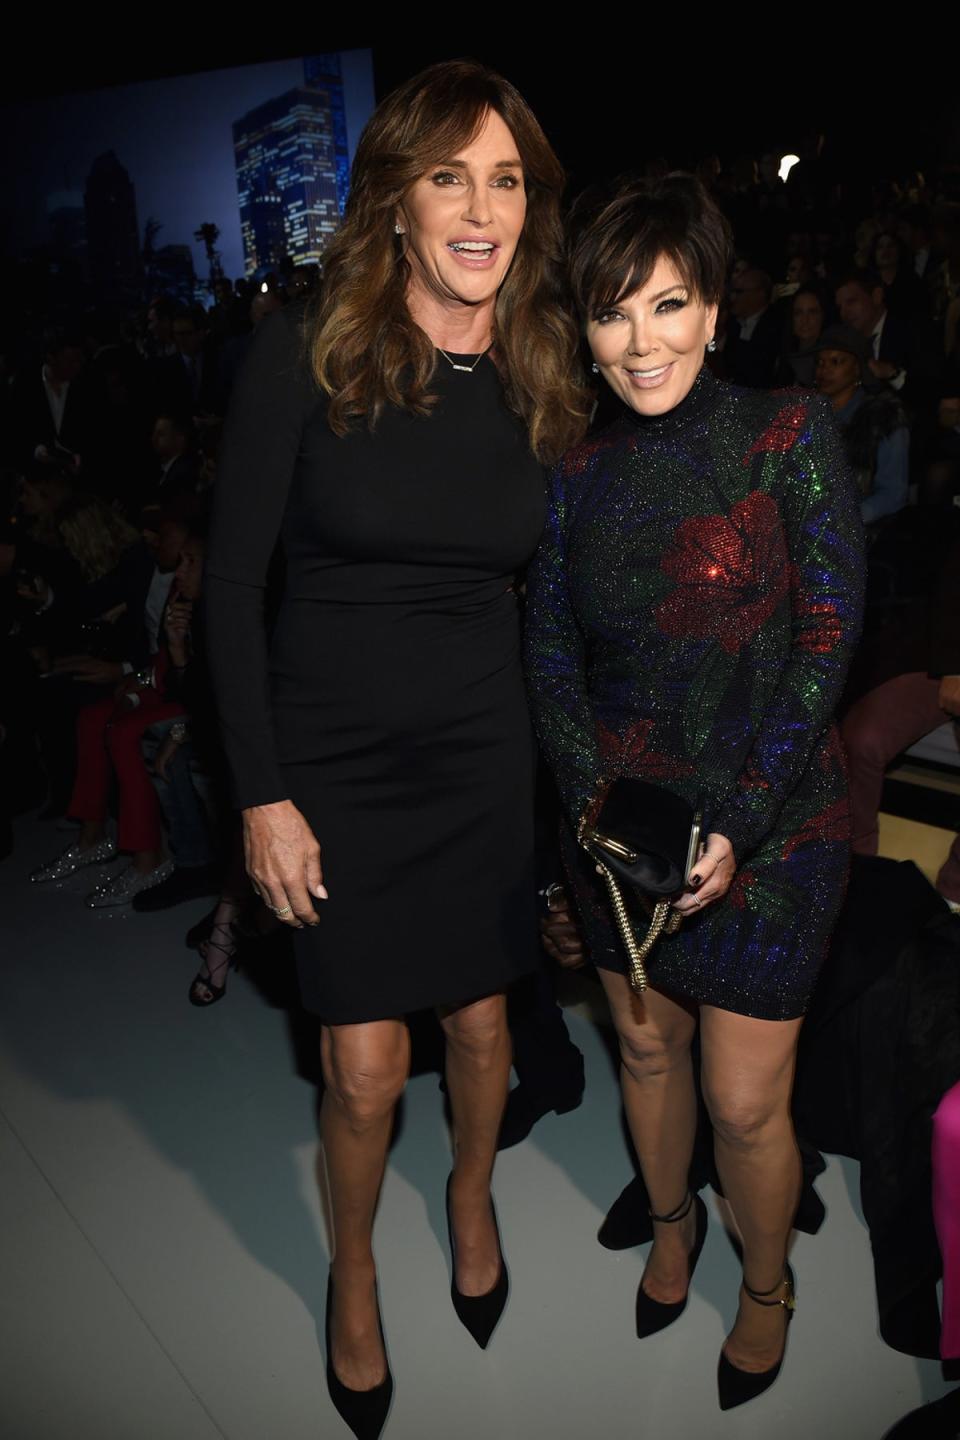 Happier times: Caitlyn Jenner and Kris Jenner attend the 2015 Victoria's Secret Fashion Show (Getty Images)